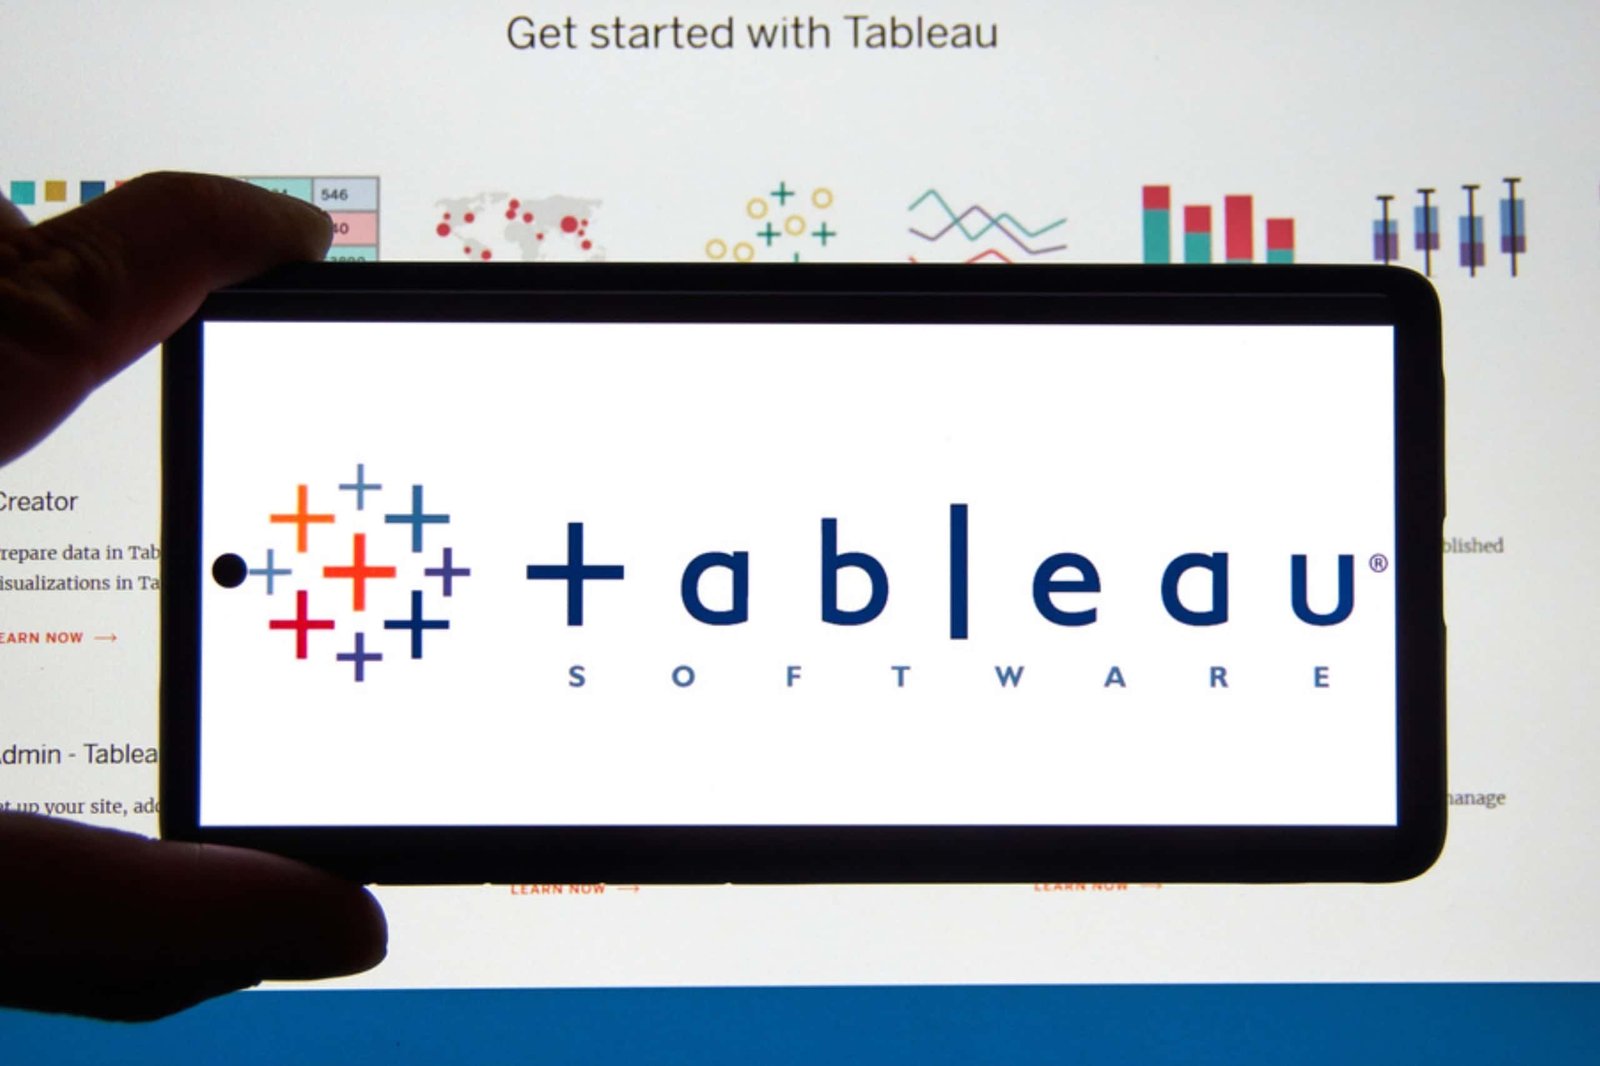 Importance of Tableau for Data Science